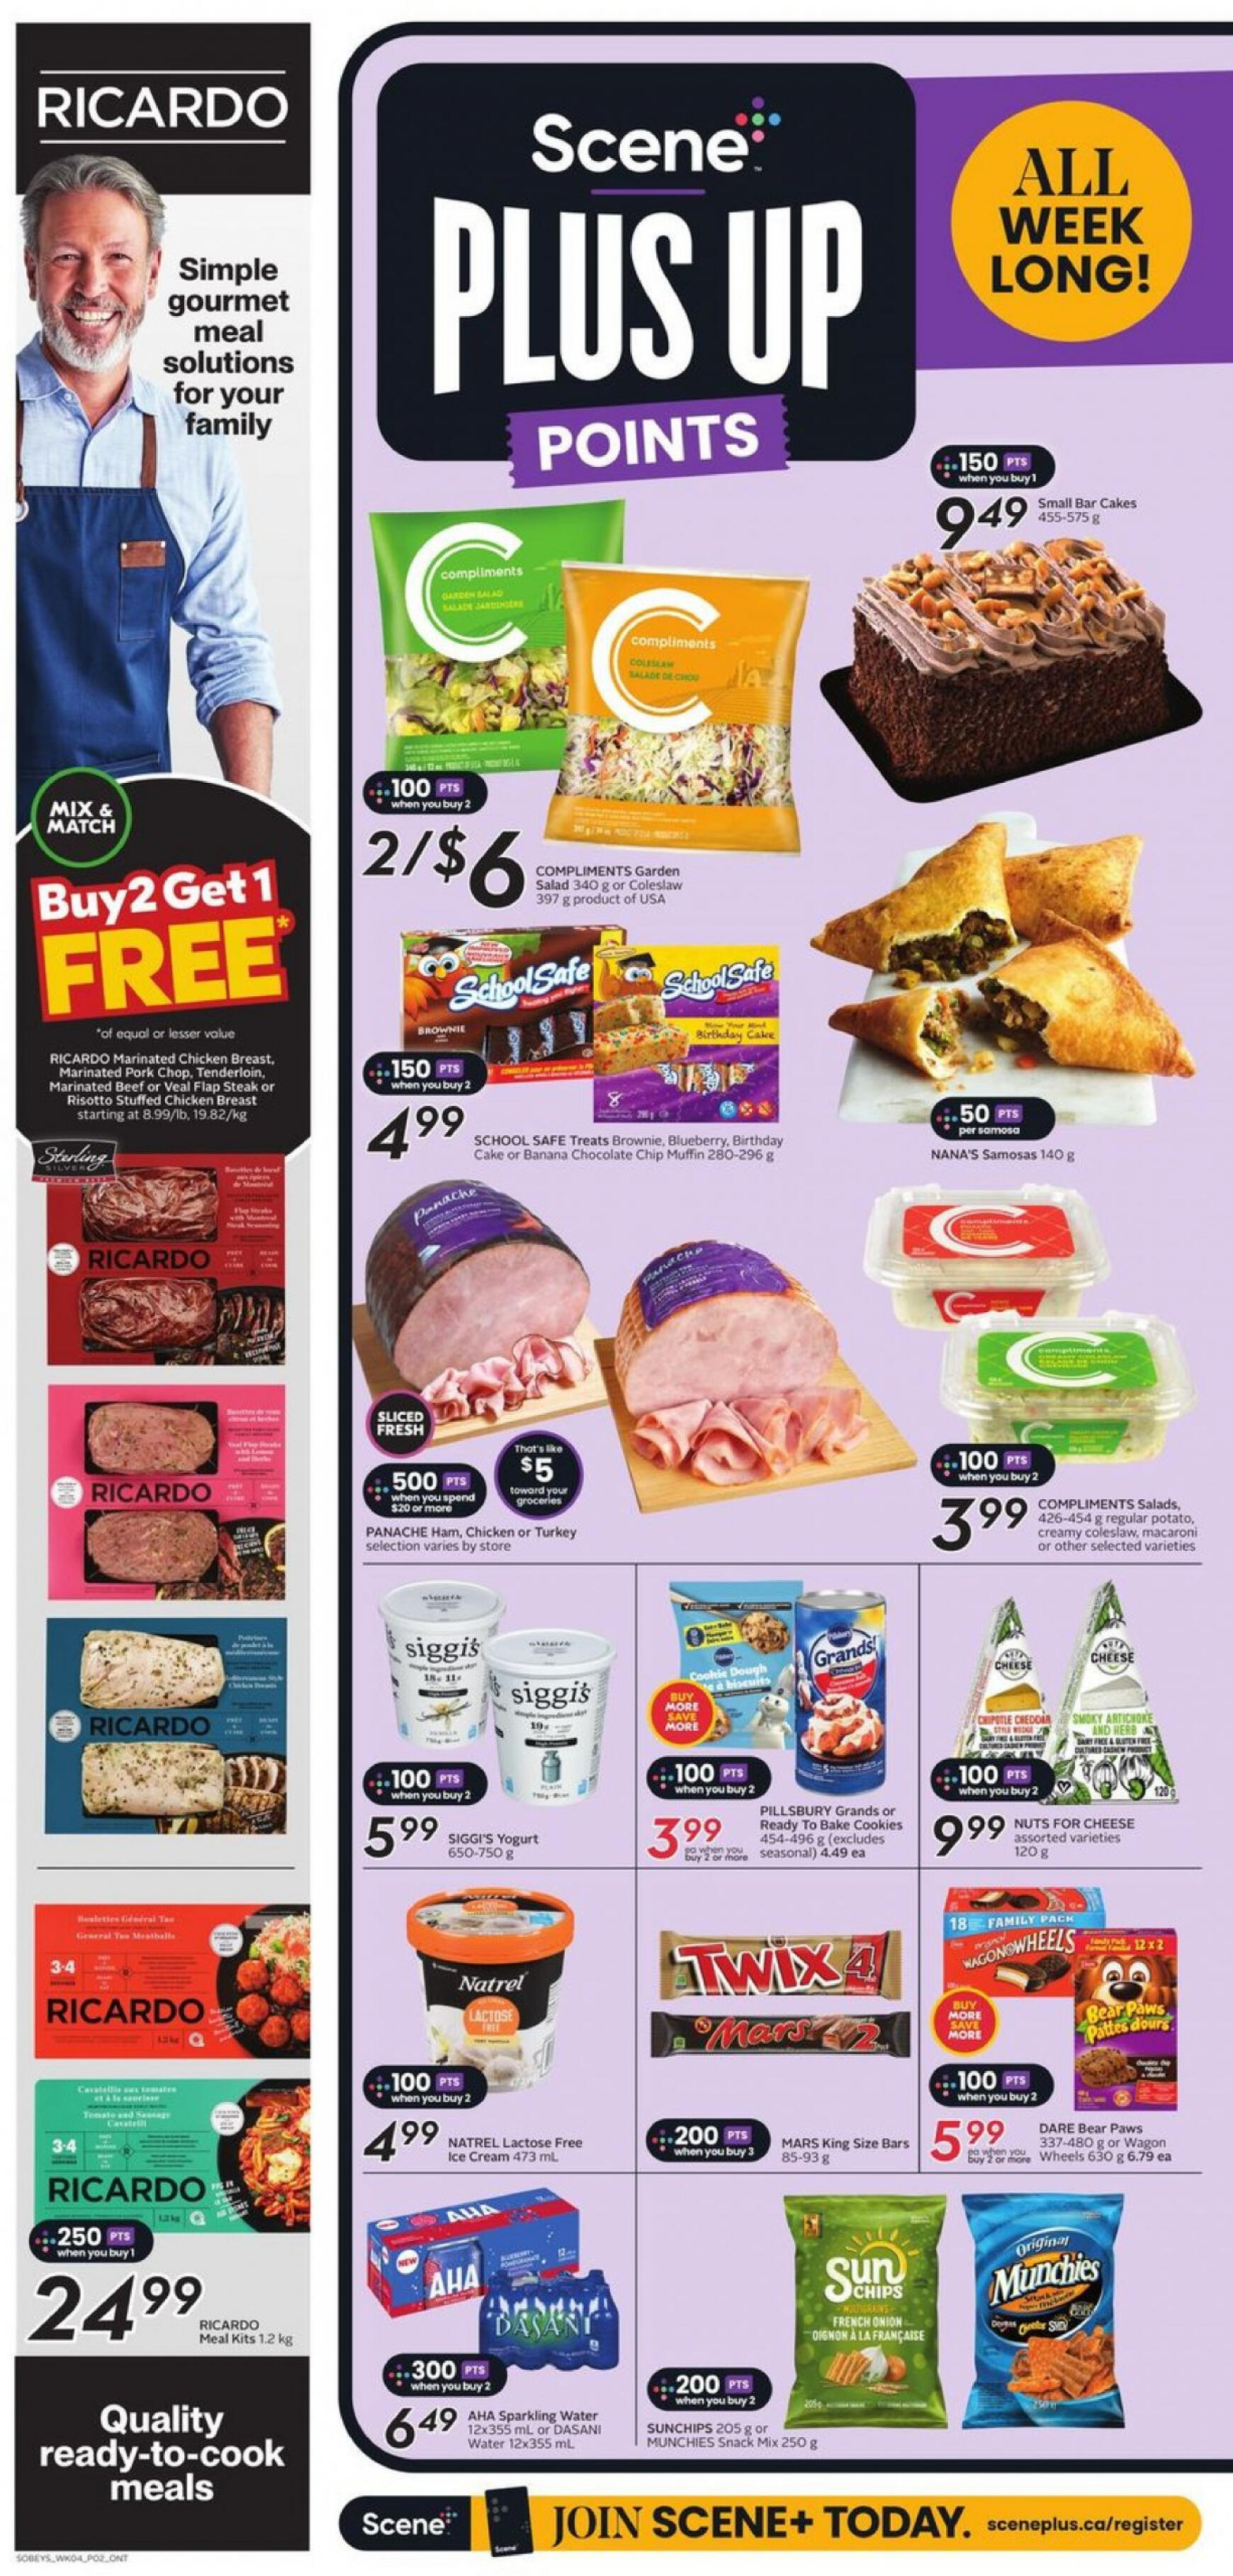 sobeys - Sobeys - Weekly Flyer - Ontario flyer current 23.05. - 29.05. - page: 6